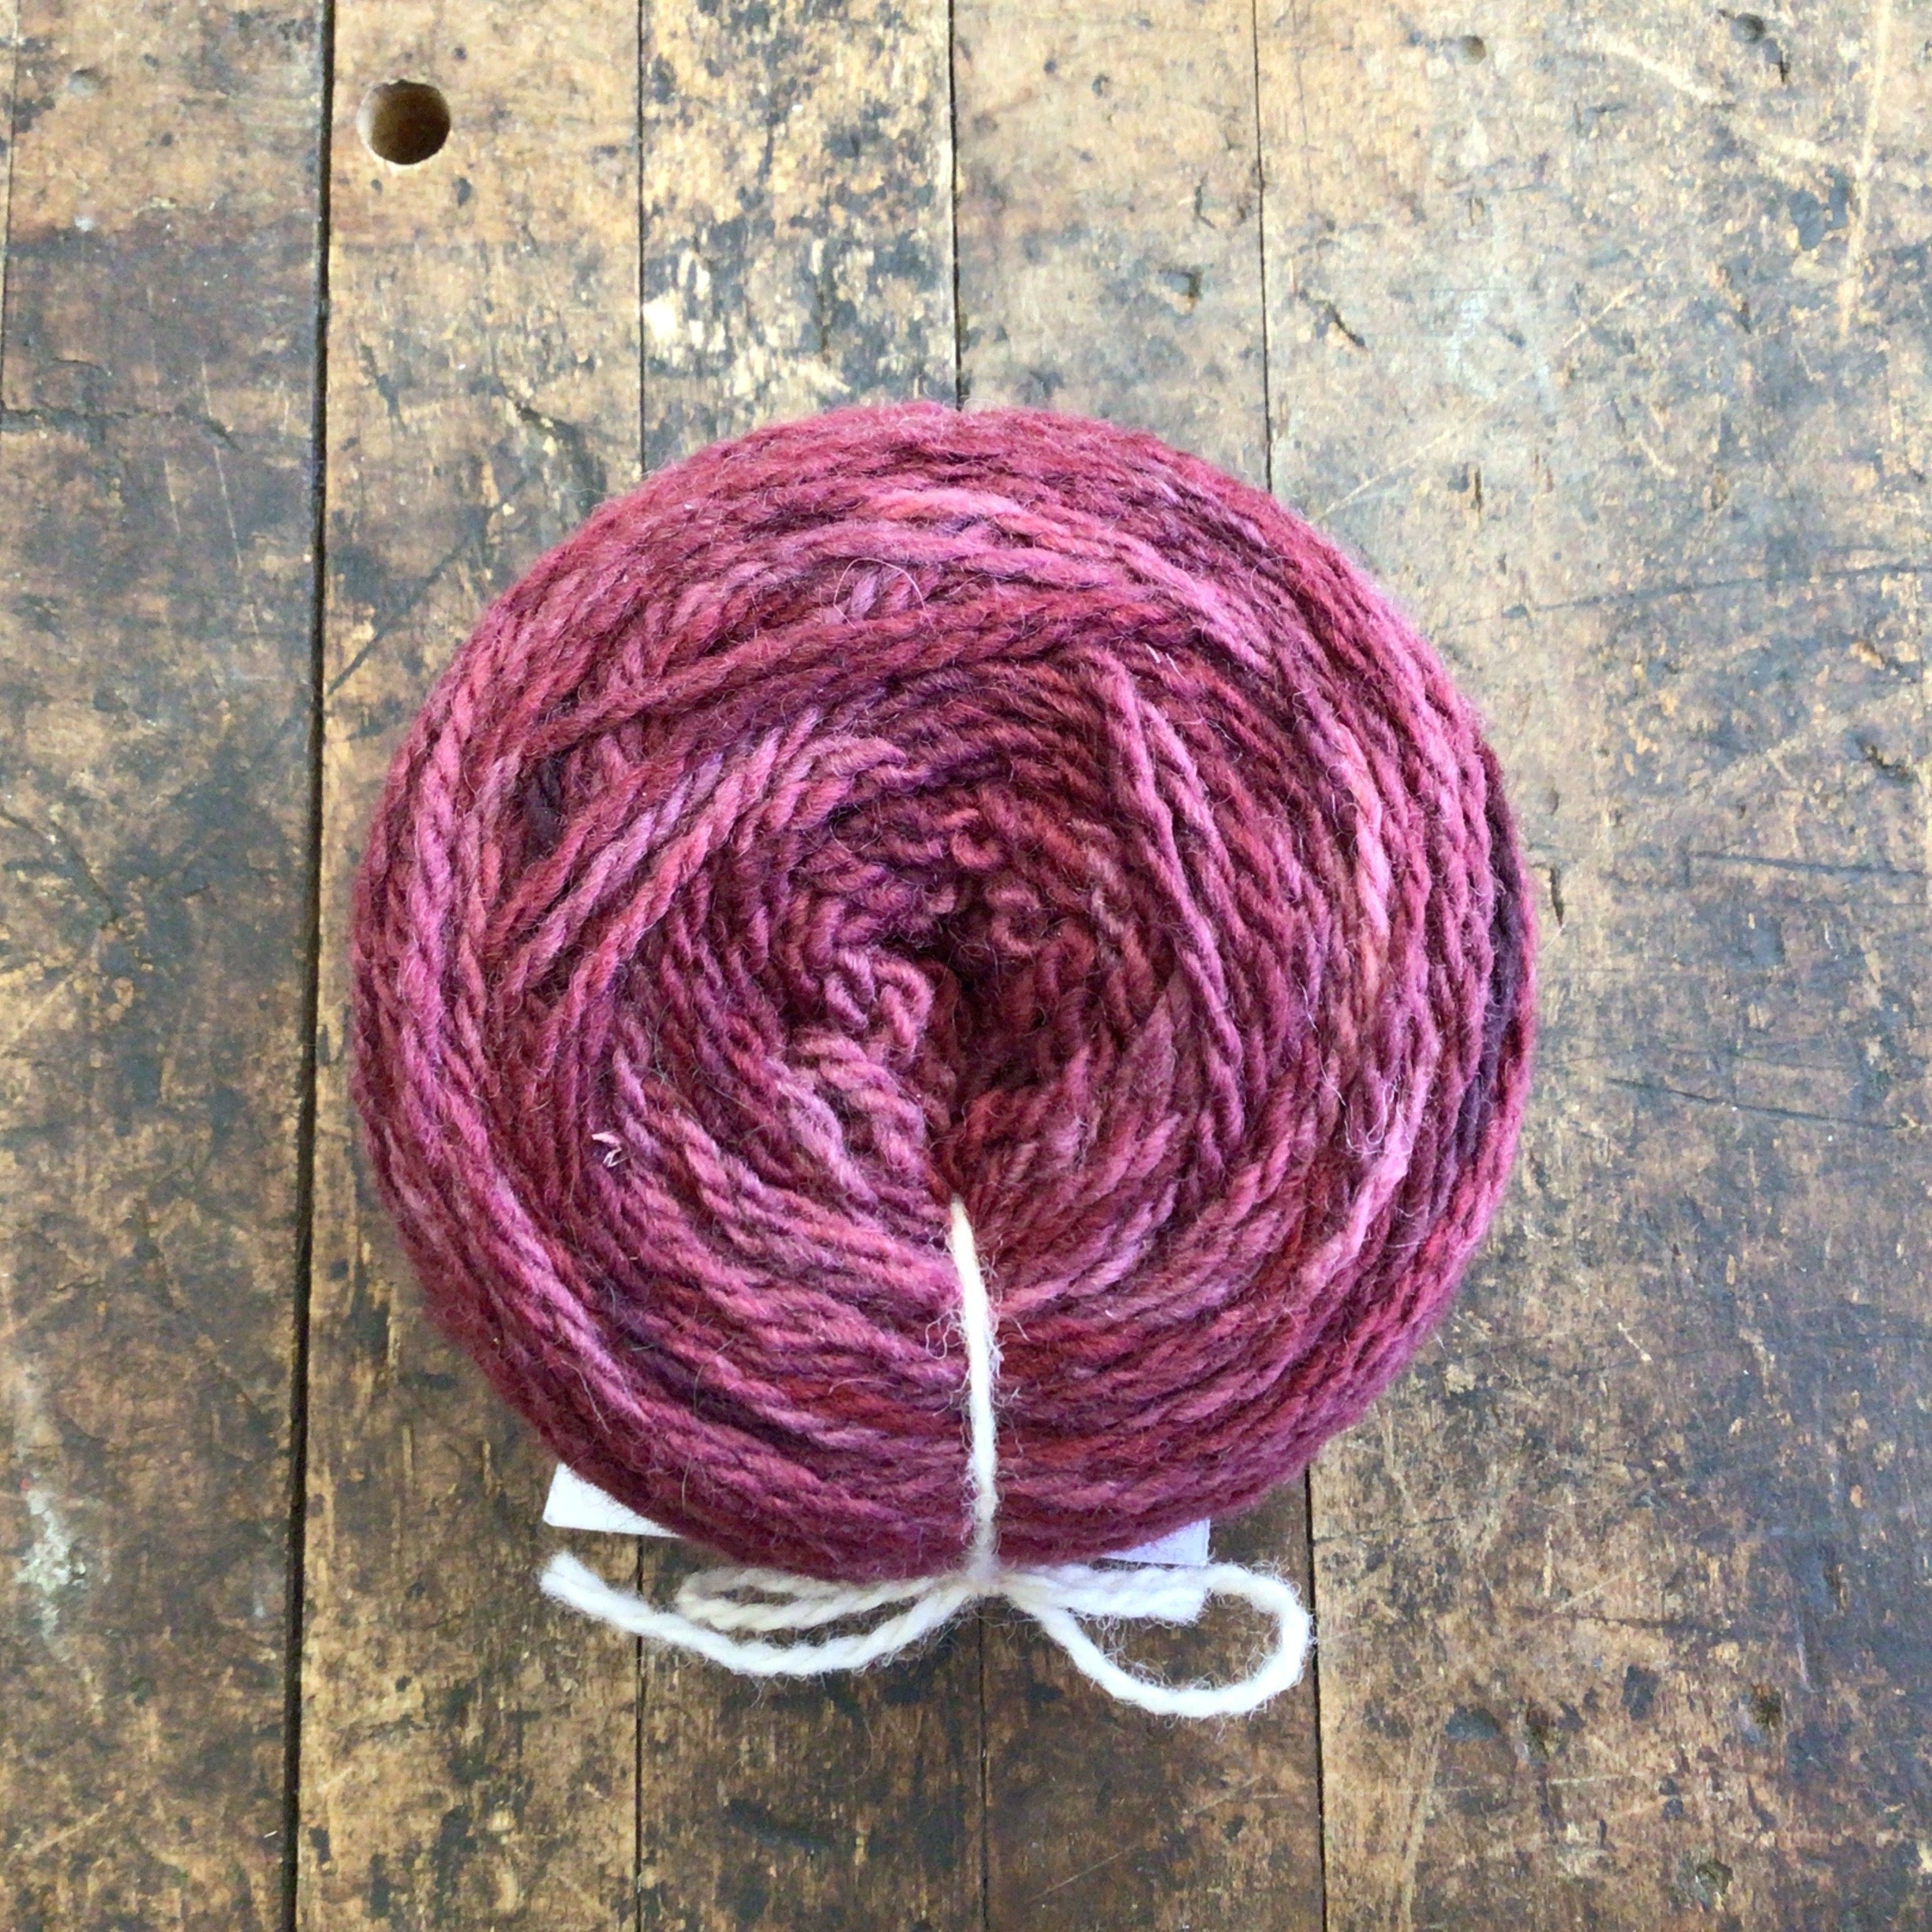 Tronstad Ranch Rambouillet 2 Ply Worsted Weight Yarn - Red